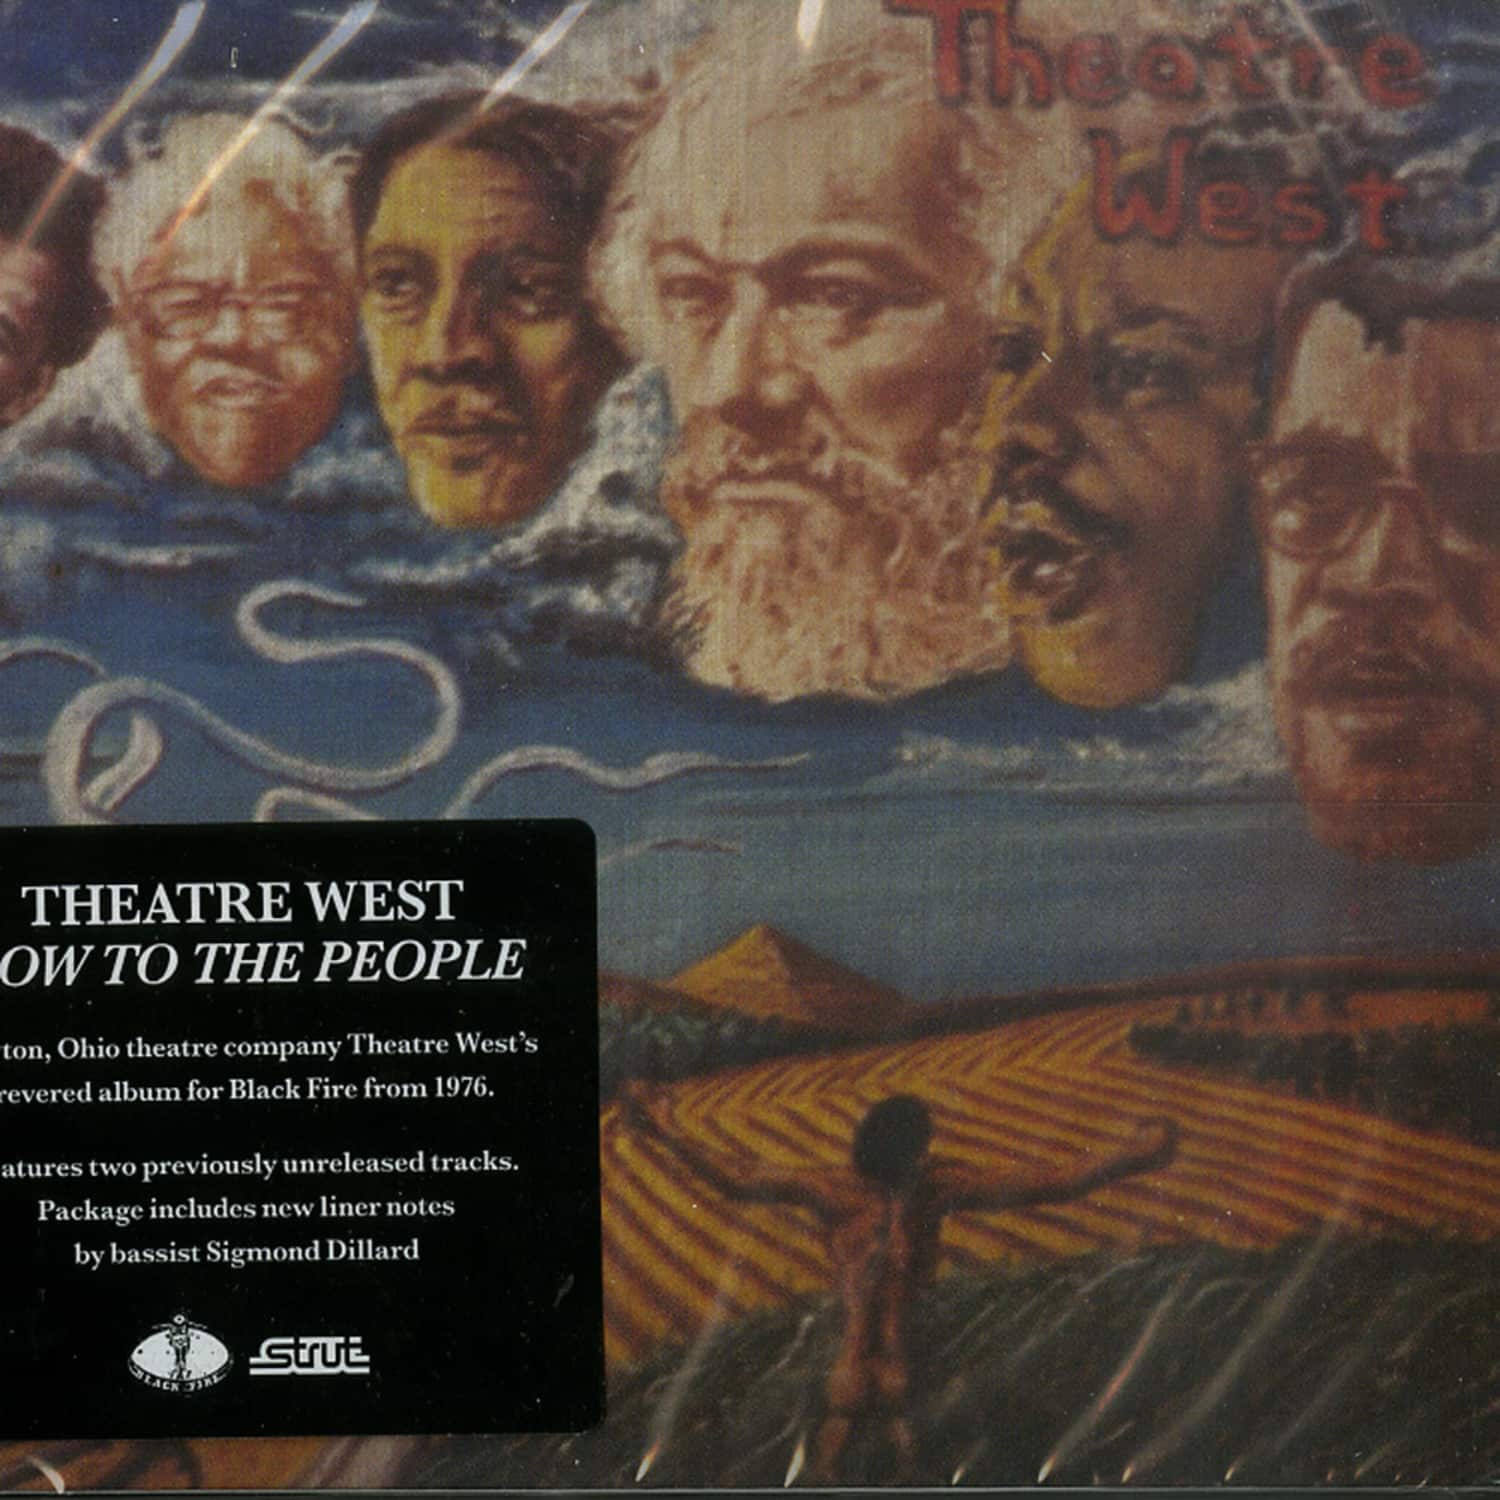 Theatre West - BOW TO THE PEOPLE 